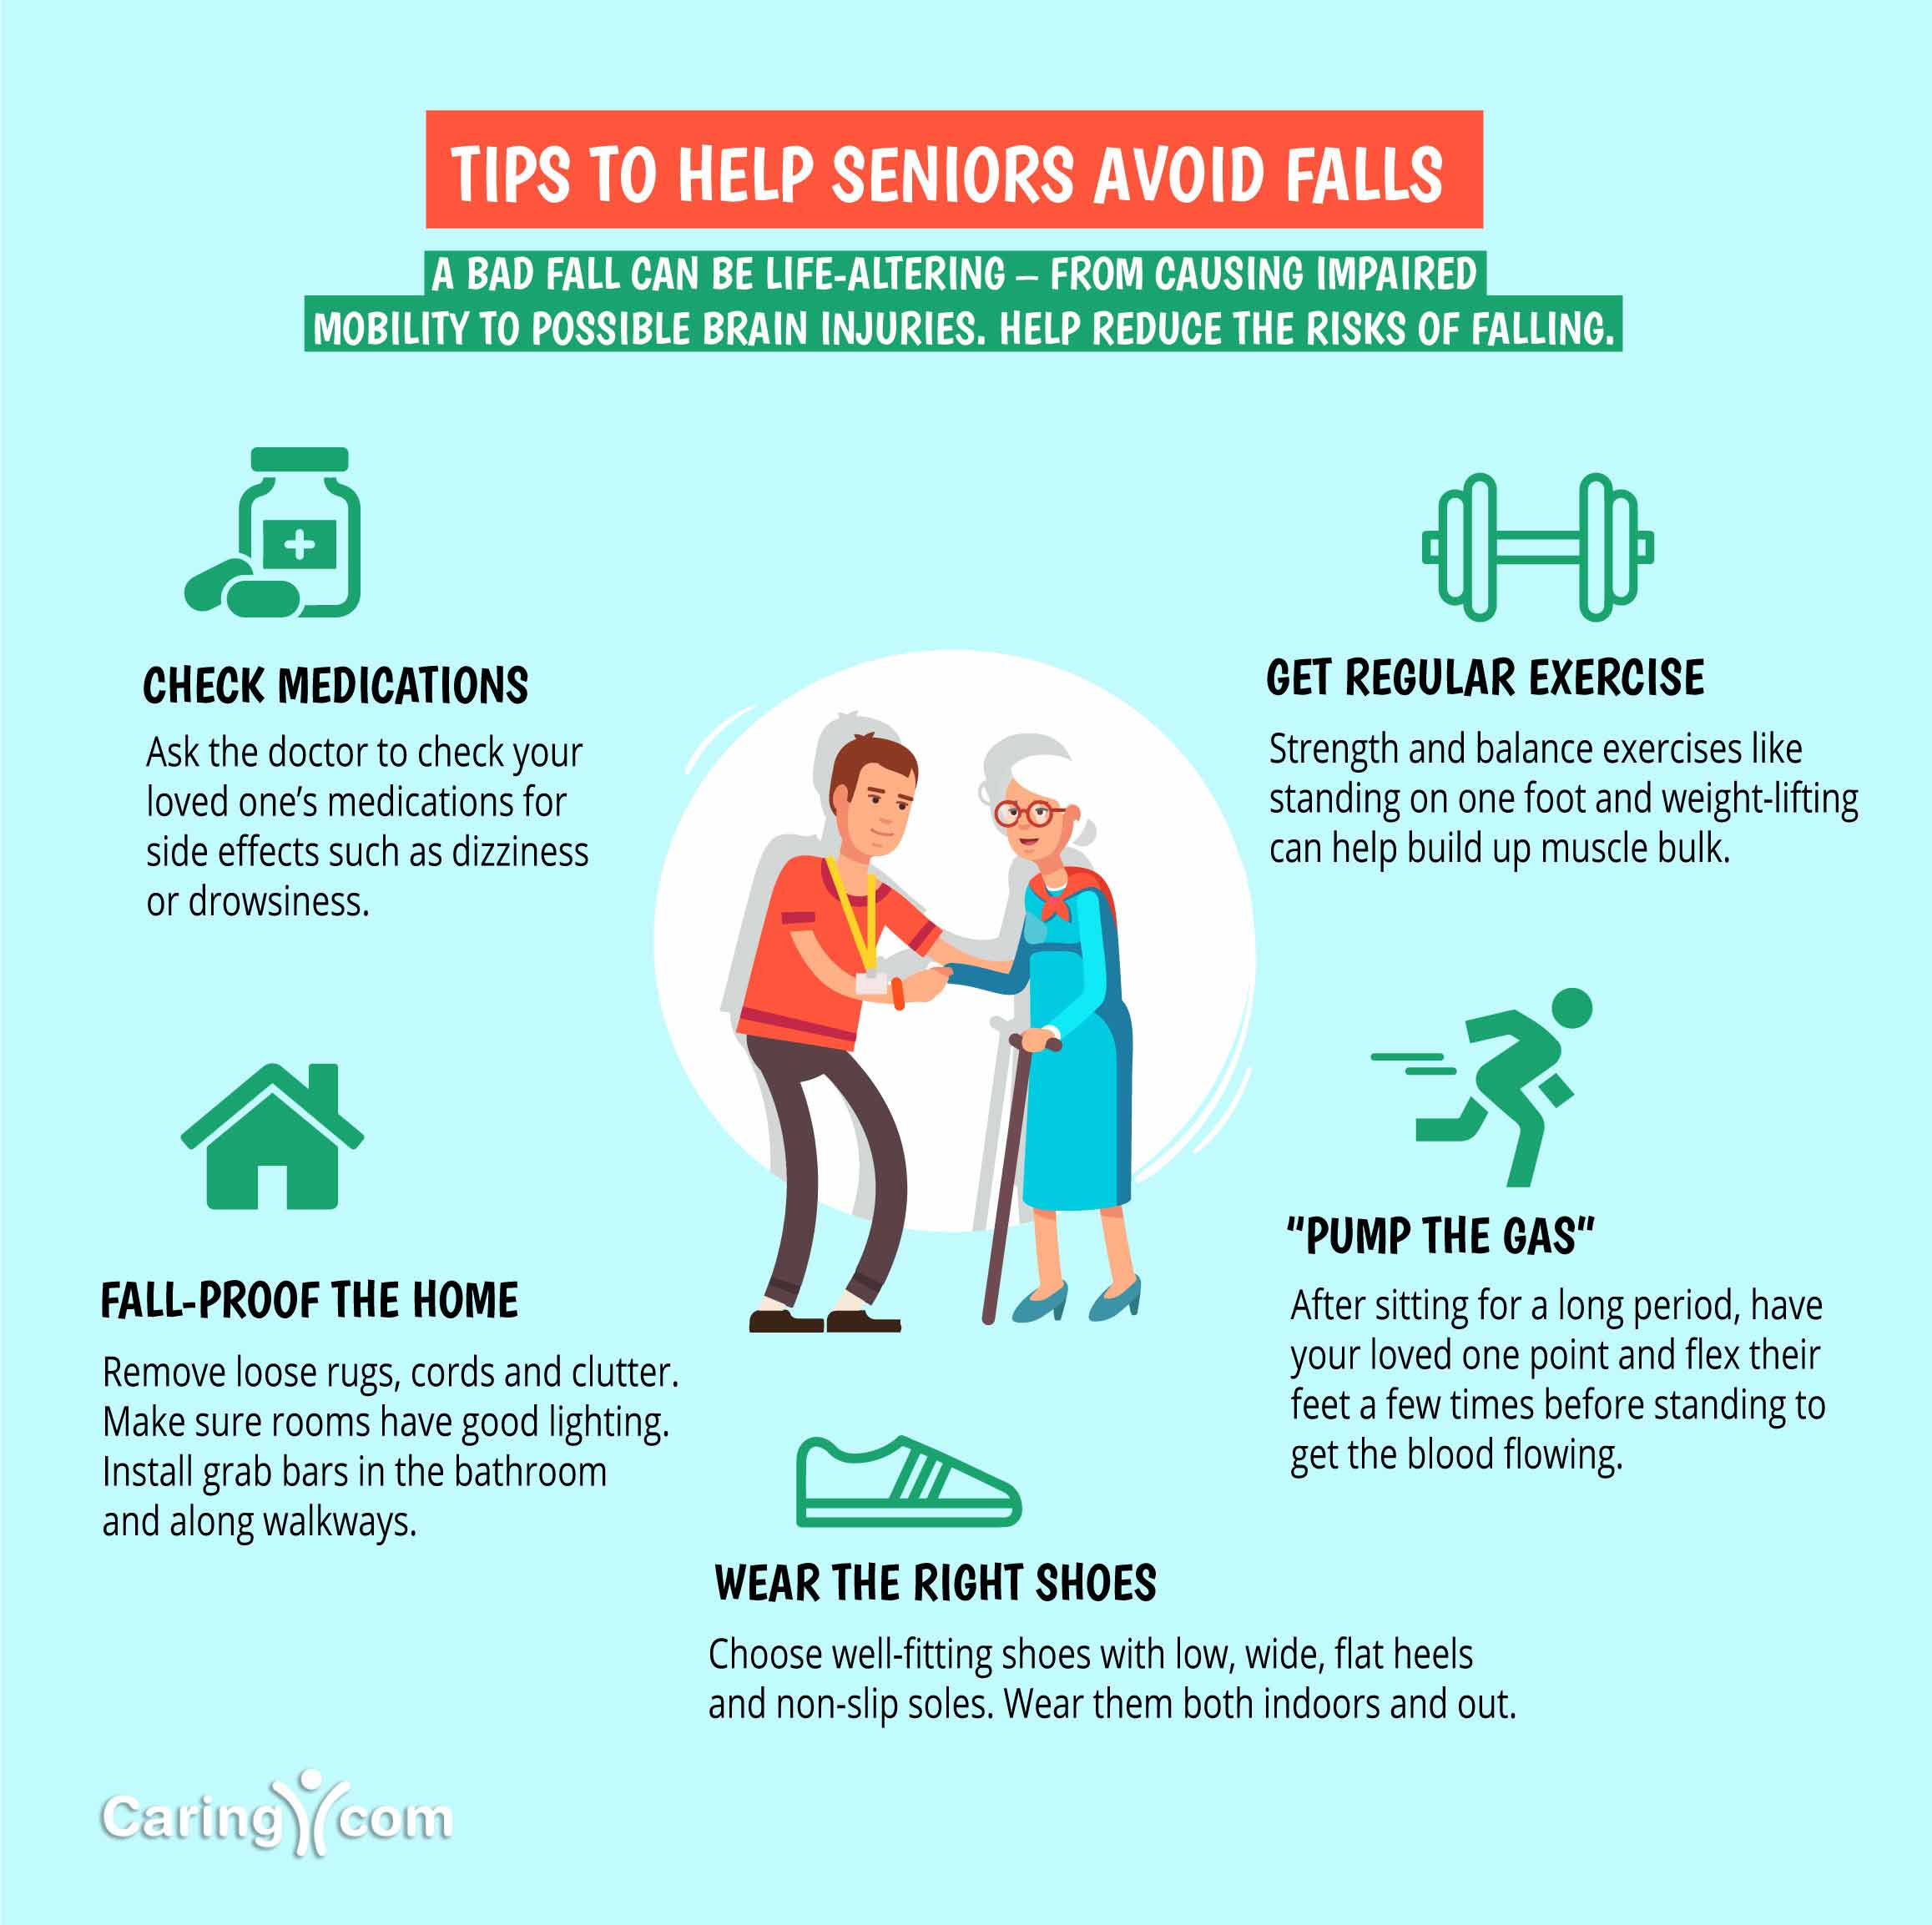 Six Tips To Help Prevent Falls